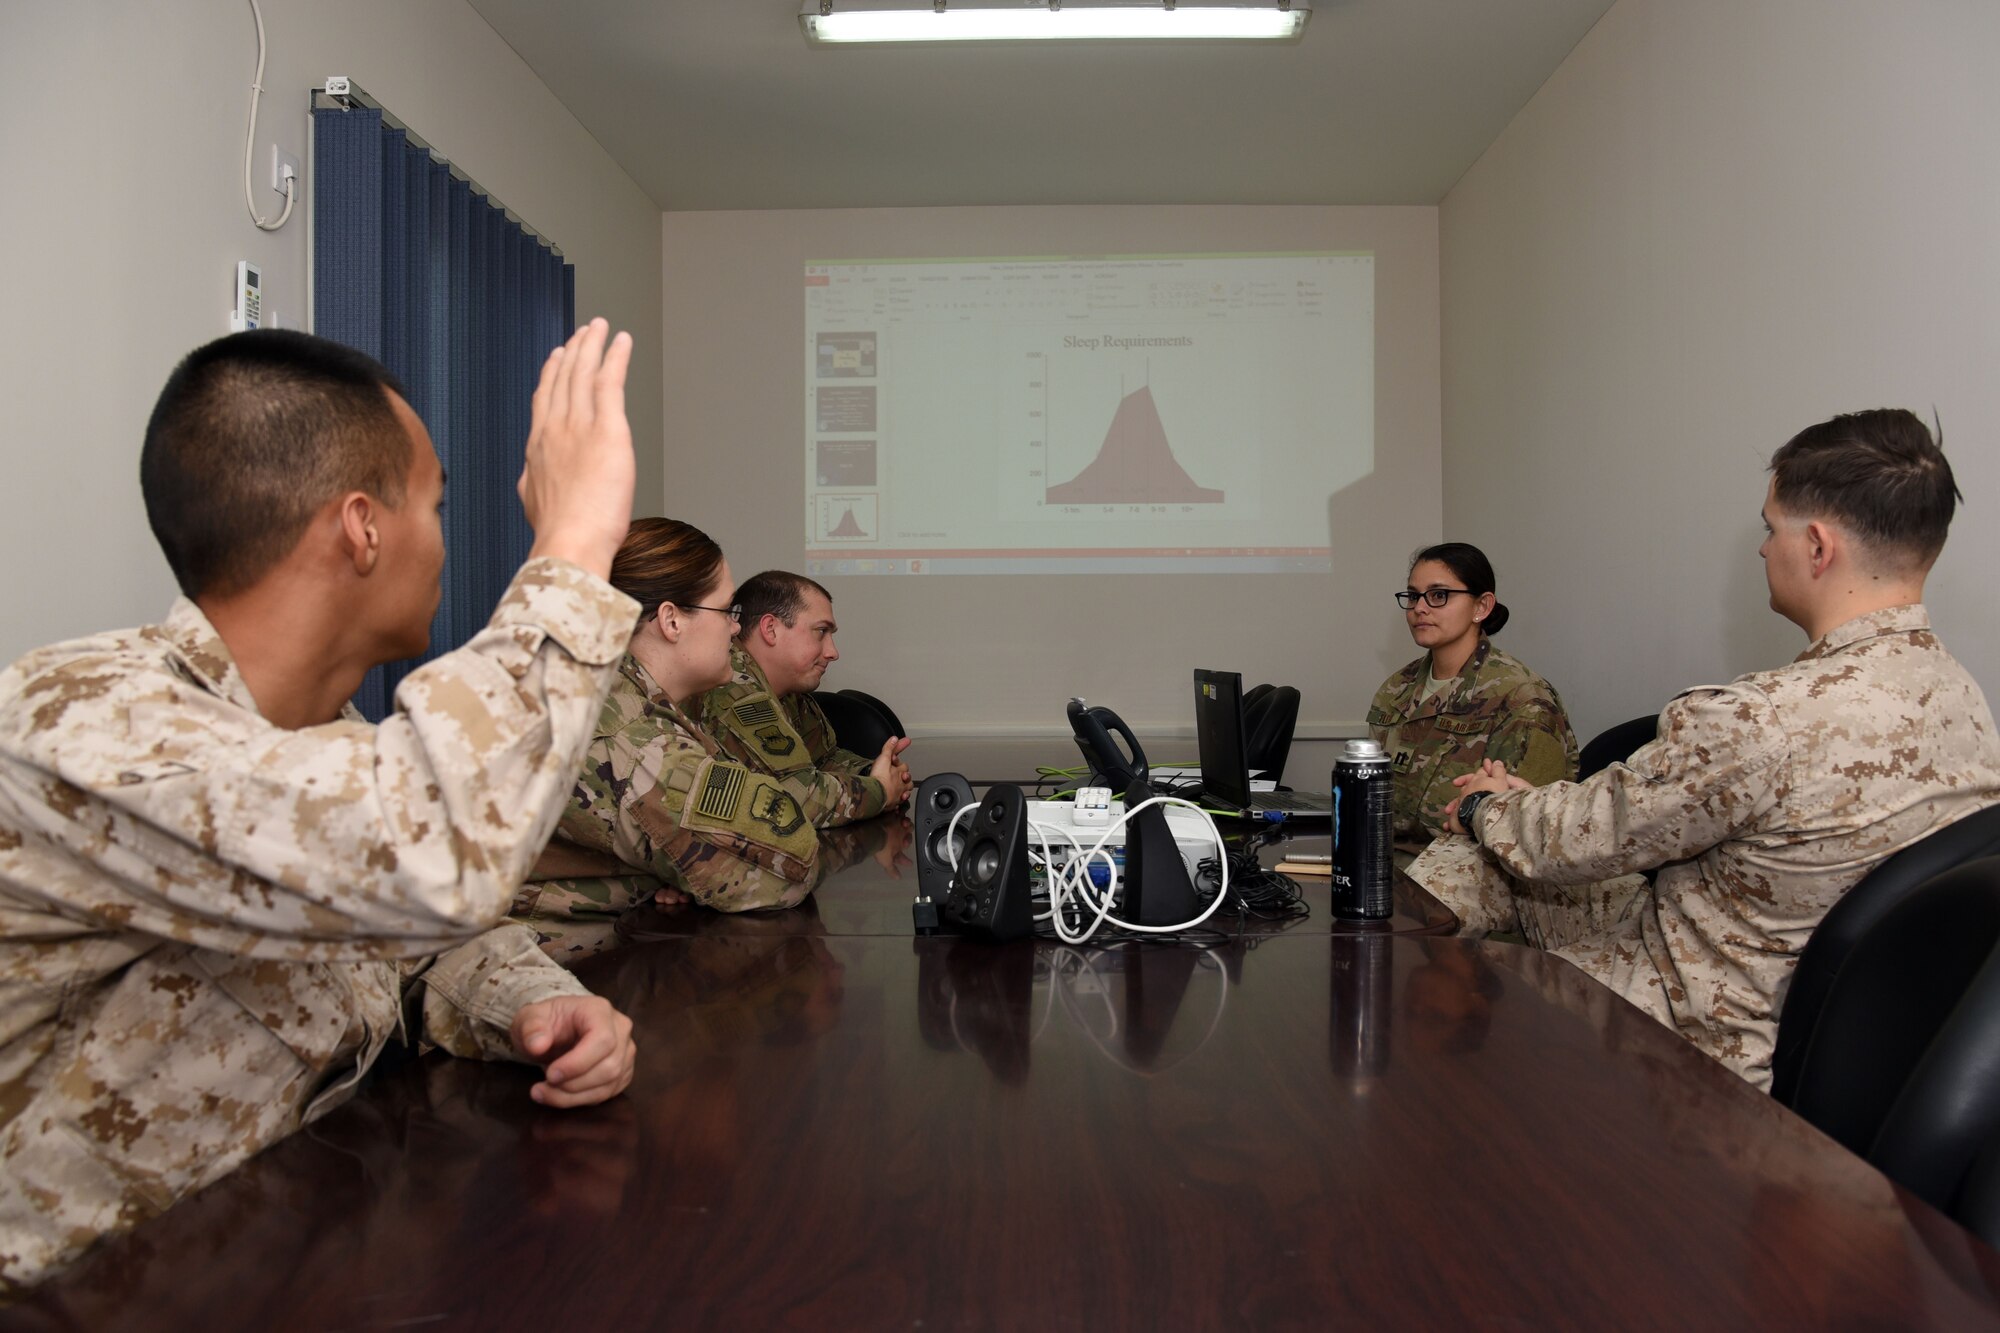 A Sailor raises his hand in response to a question during a 332nd Expeditionary Medical Group sleep enhancement class at the base clinic in an undisclosed location Feb. 7. The Mental Health section runs the class every Wednesday at 2 p.m. for all service members and base contractors who want to learn tips on improving sleep, common myths about sleep, and individualized sleep plans and recommendations.  (U.S. Air Force photo by Staff Sgt. Joshua Edwards/Released)